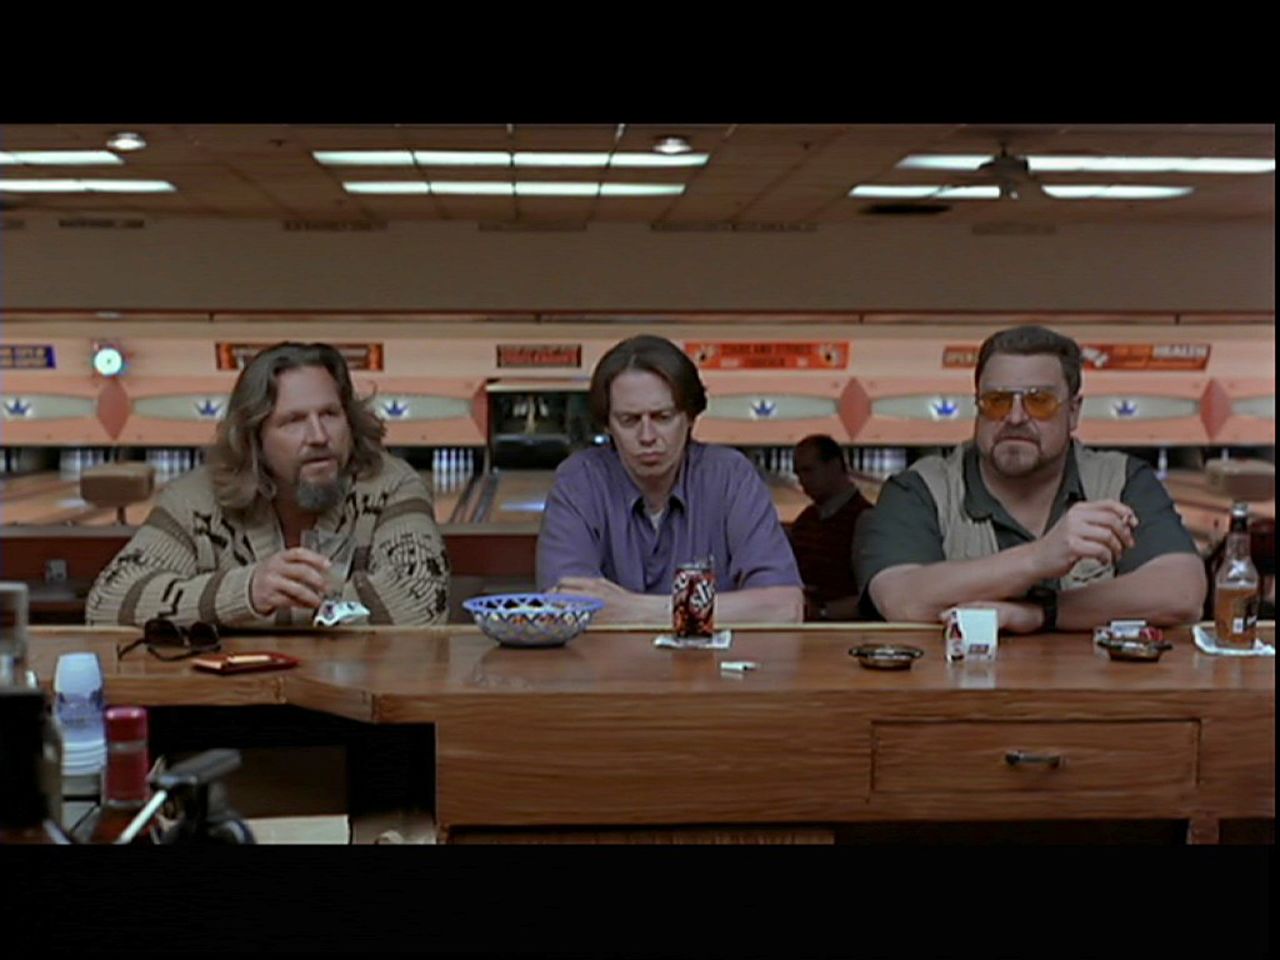 "The Big Lebowski" turns 17 on March 6. Joel and Ethan Coen's 1998 flick, complete with a cast of Oscar-winners and Hollywood A-listers, has become a cult classic despite flopping at the box office. In 2011, actress Tara Reid said a <a href="http://marquee.blogs.cnn.com/2011/02/01/big-lebowski-2-in-the-works/" target="_blank">sequel</a> was in the works. However, the Coen Brothers have since made it clear that they have no plans for a "Big Lebowski 2."